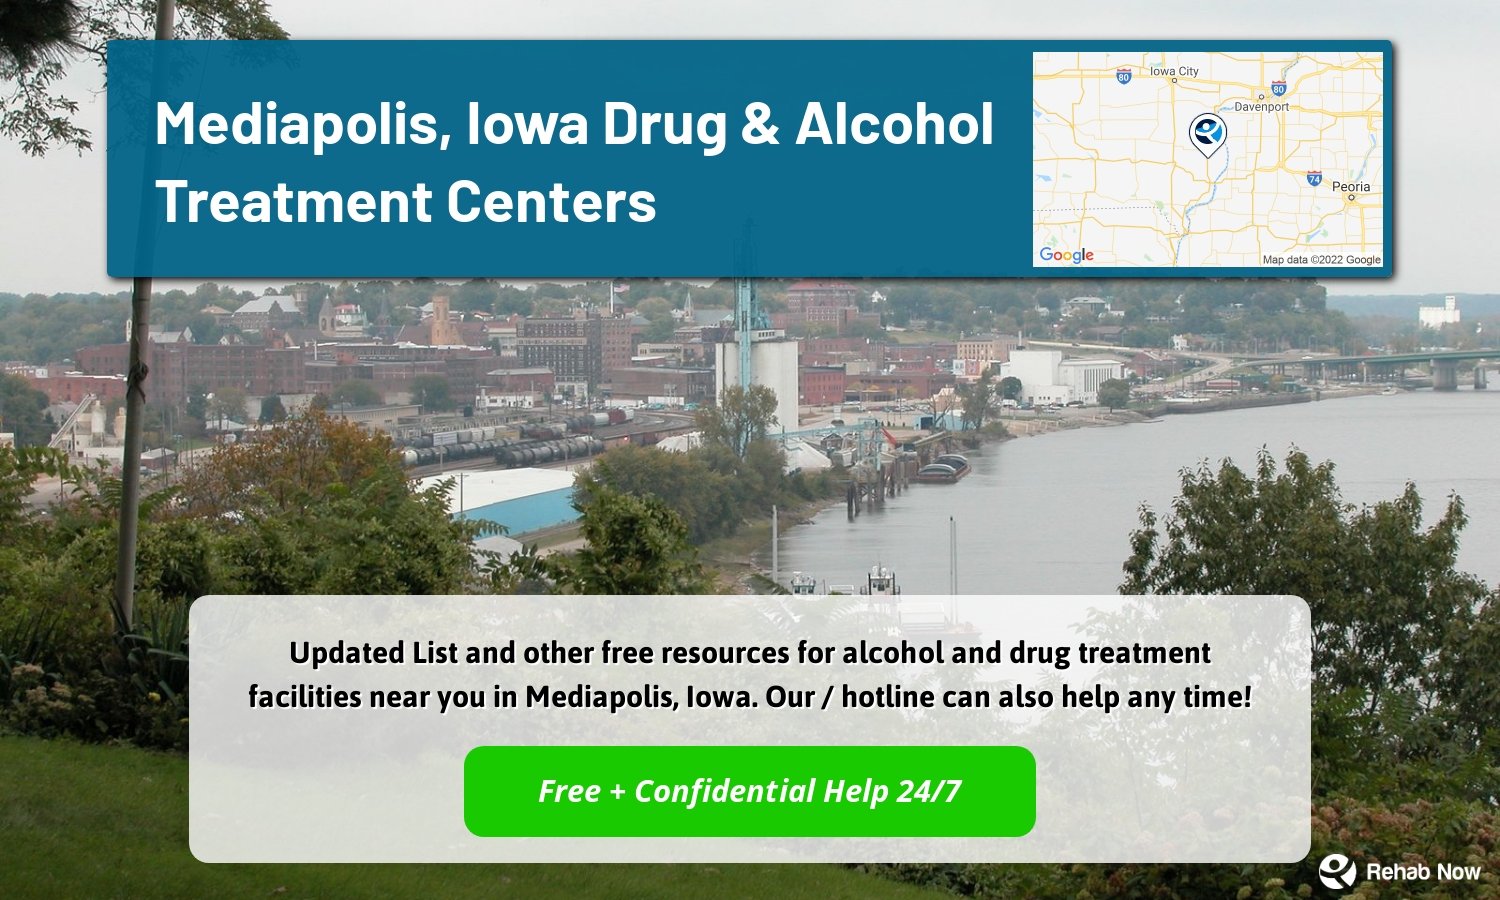  Updated List and other free resources for alcohol and drug treatment facilities near you in Mediapolis, Iowa. Our / hotline can also help any time!